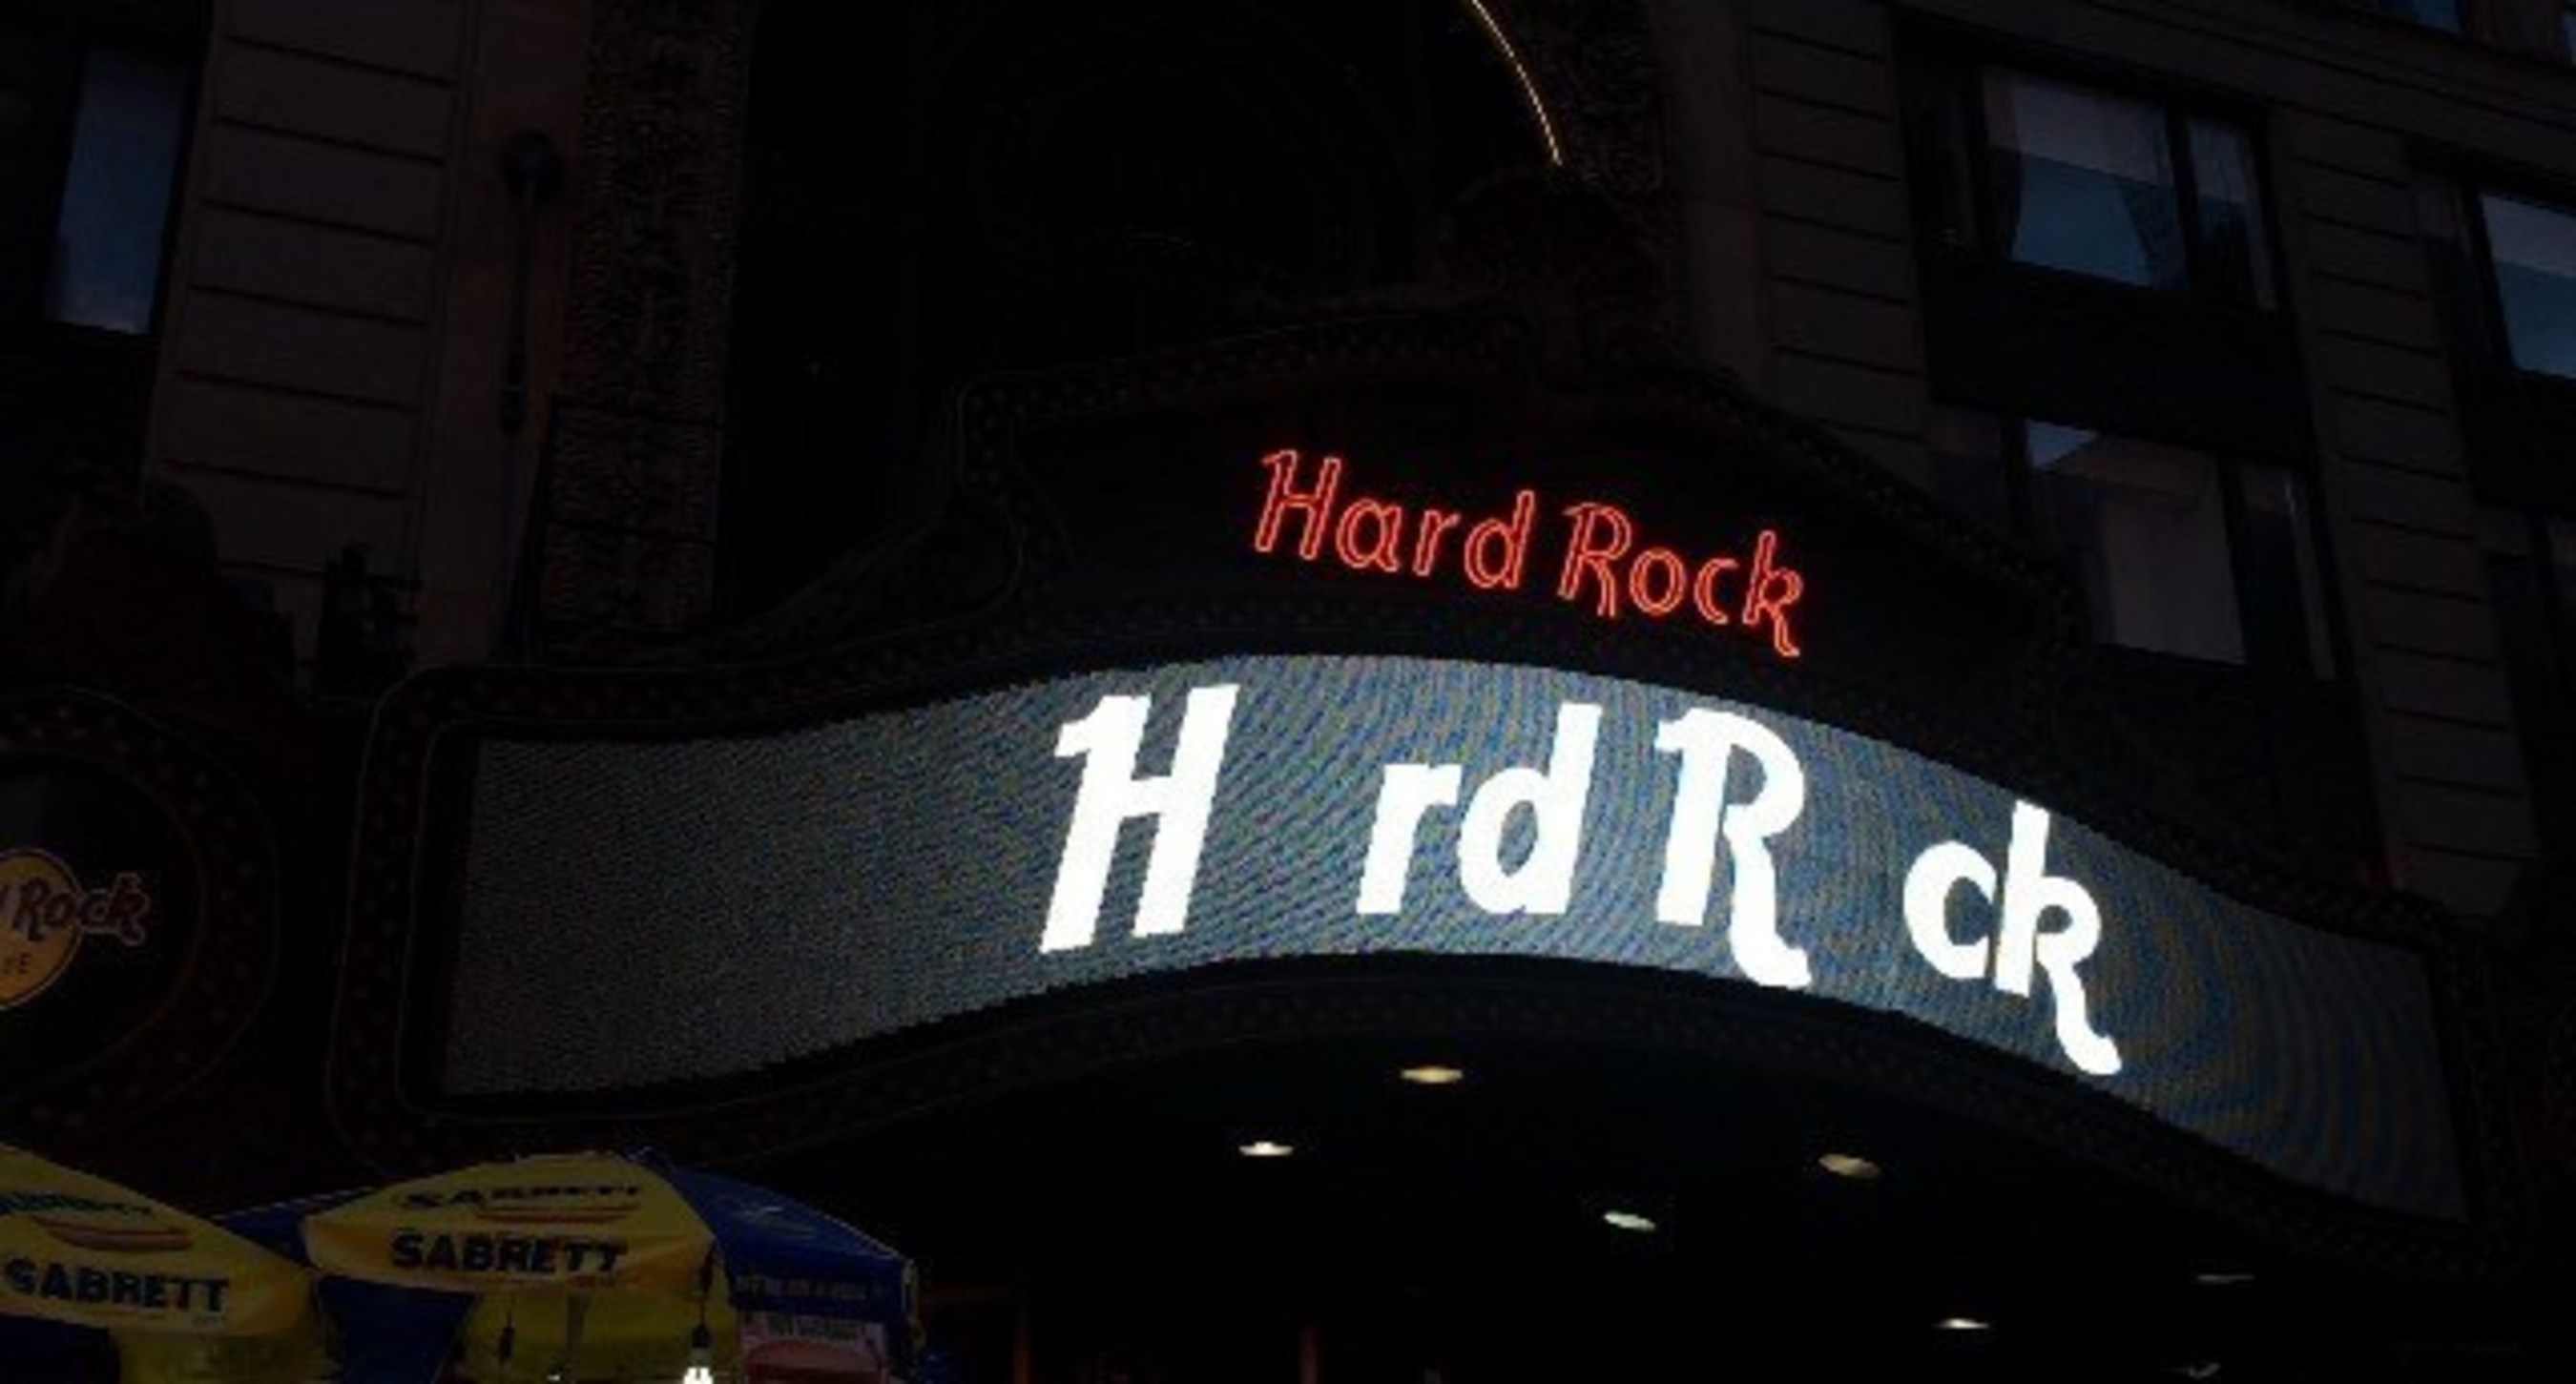 Hard Rock Cafe shows support for the #MissingType campaign by removing the 'A' and 'O' from their iconic Times Square digital sign.